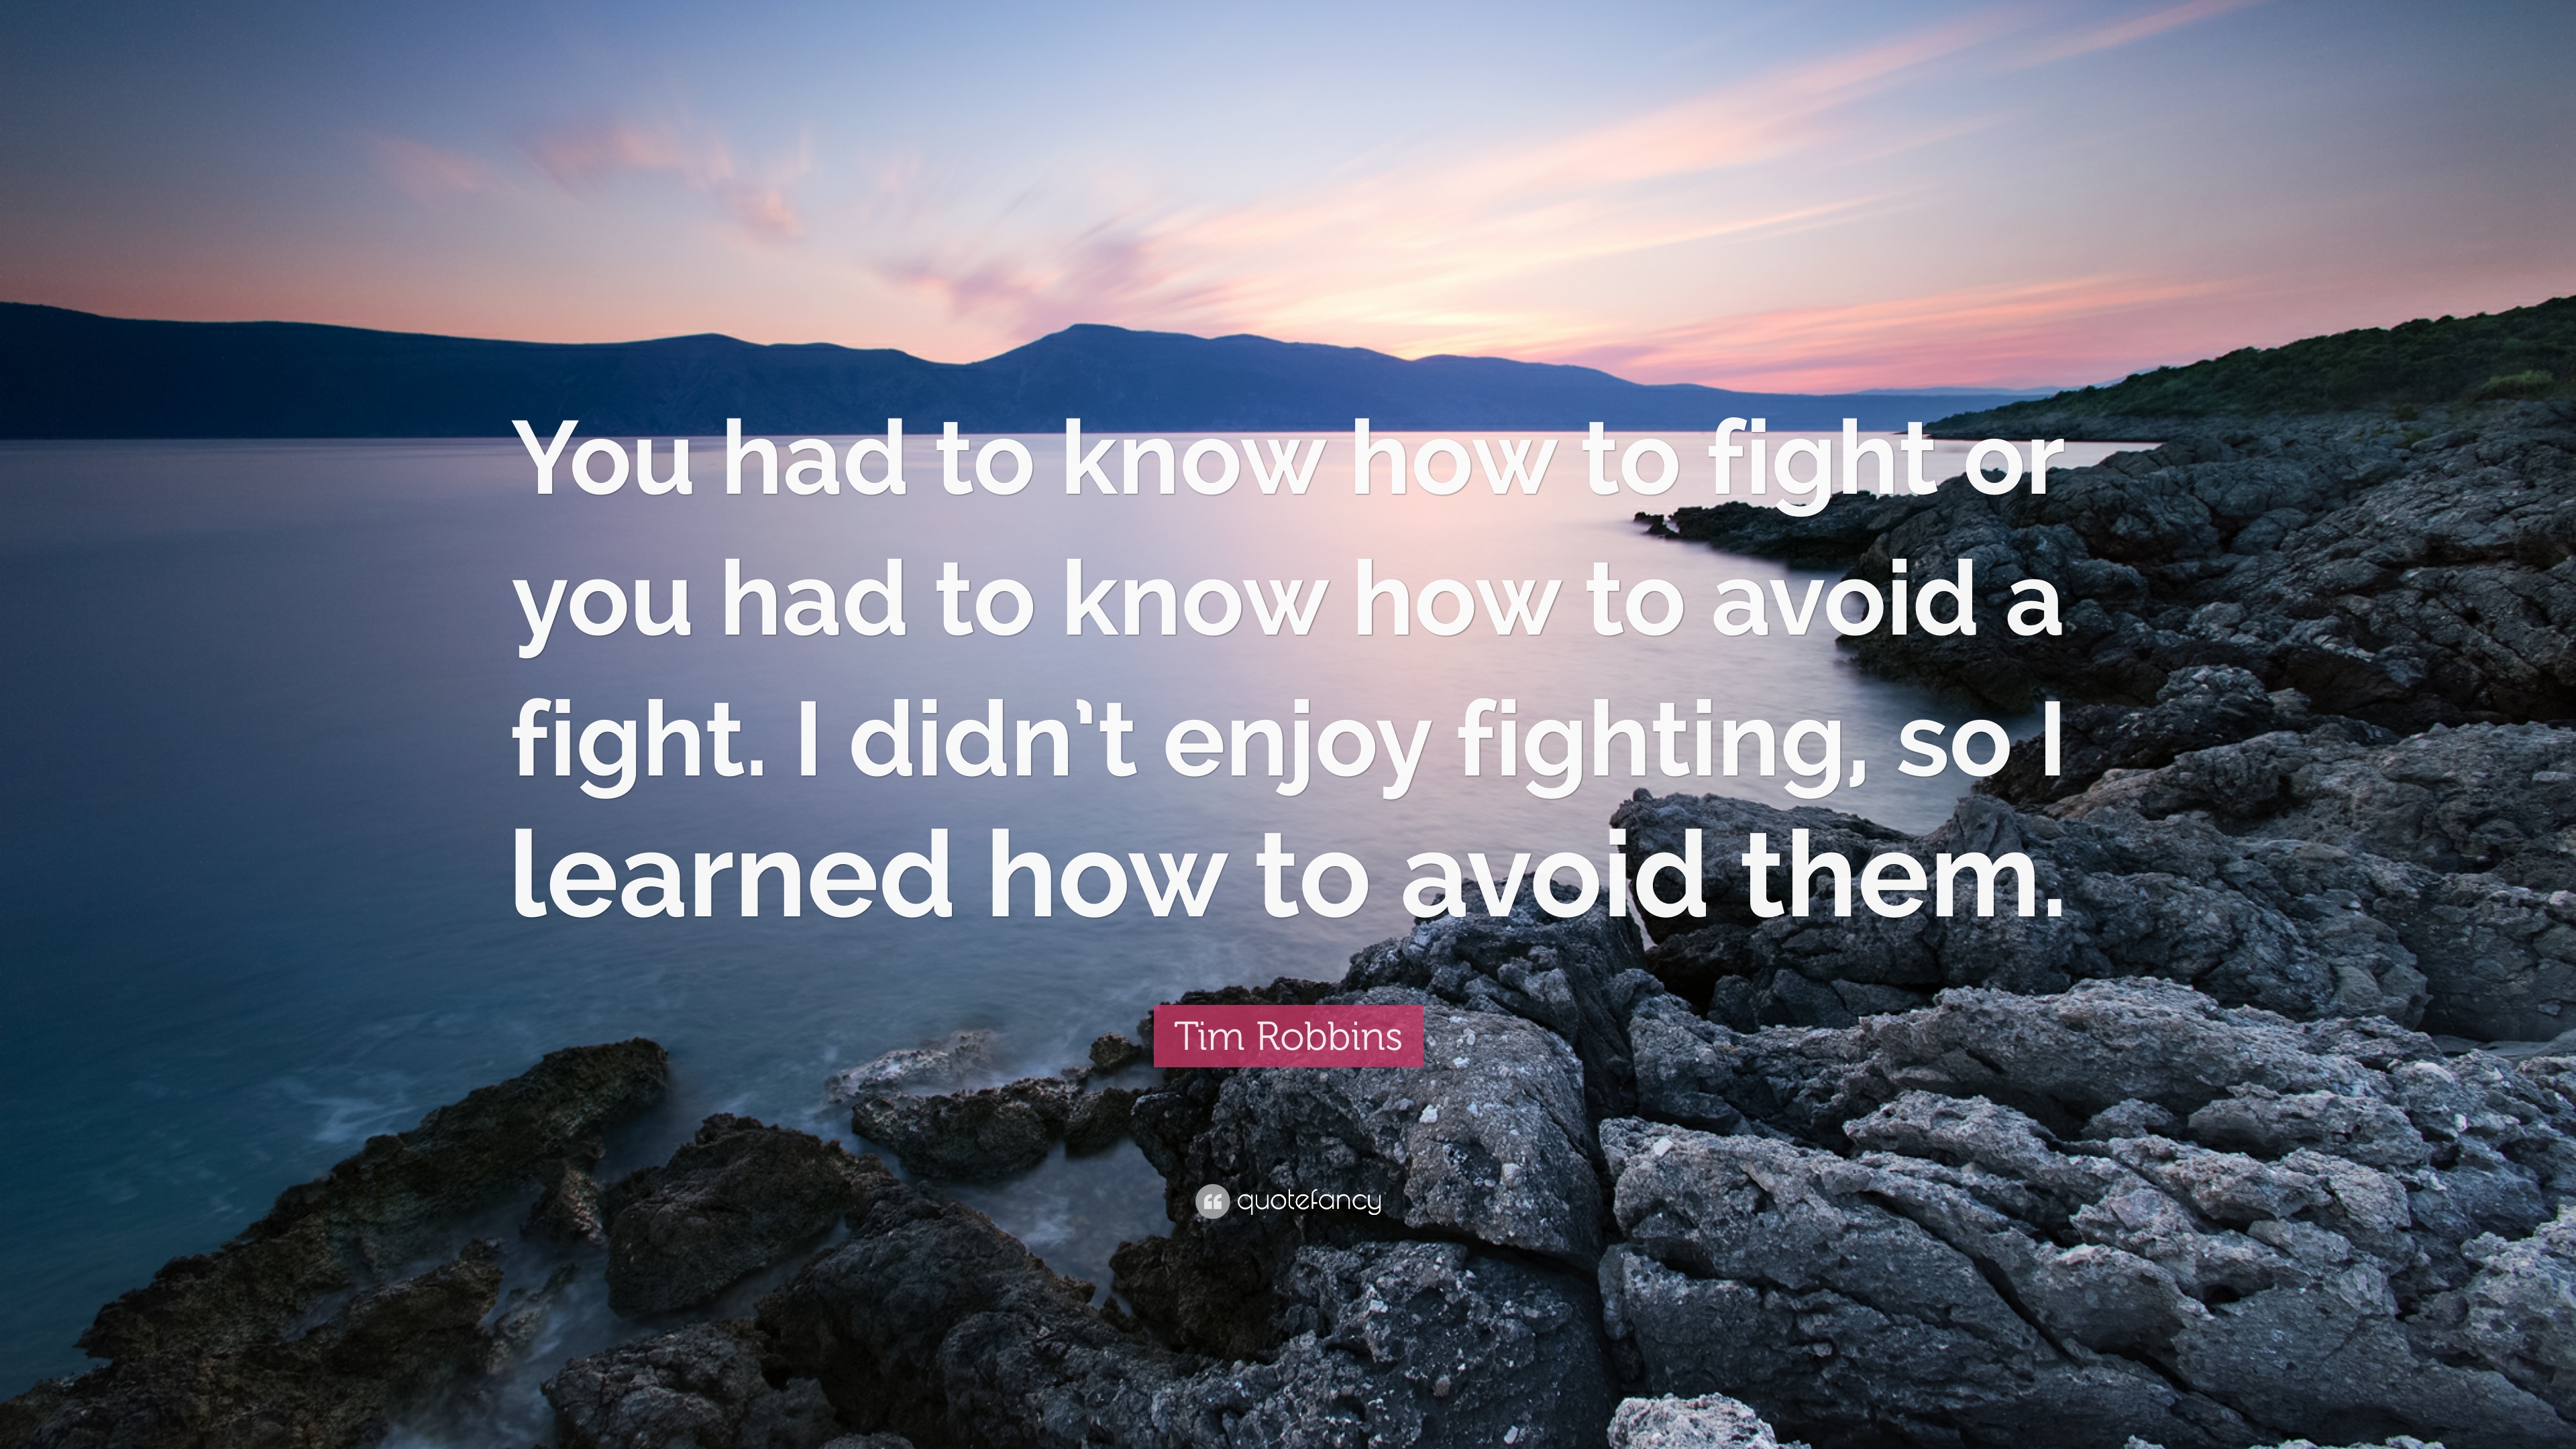 Tim Robbins Quote: “You had to know how to fight or you had